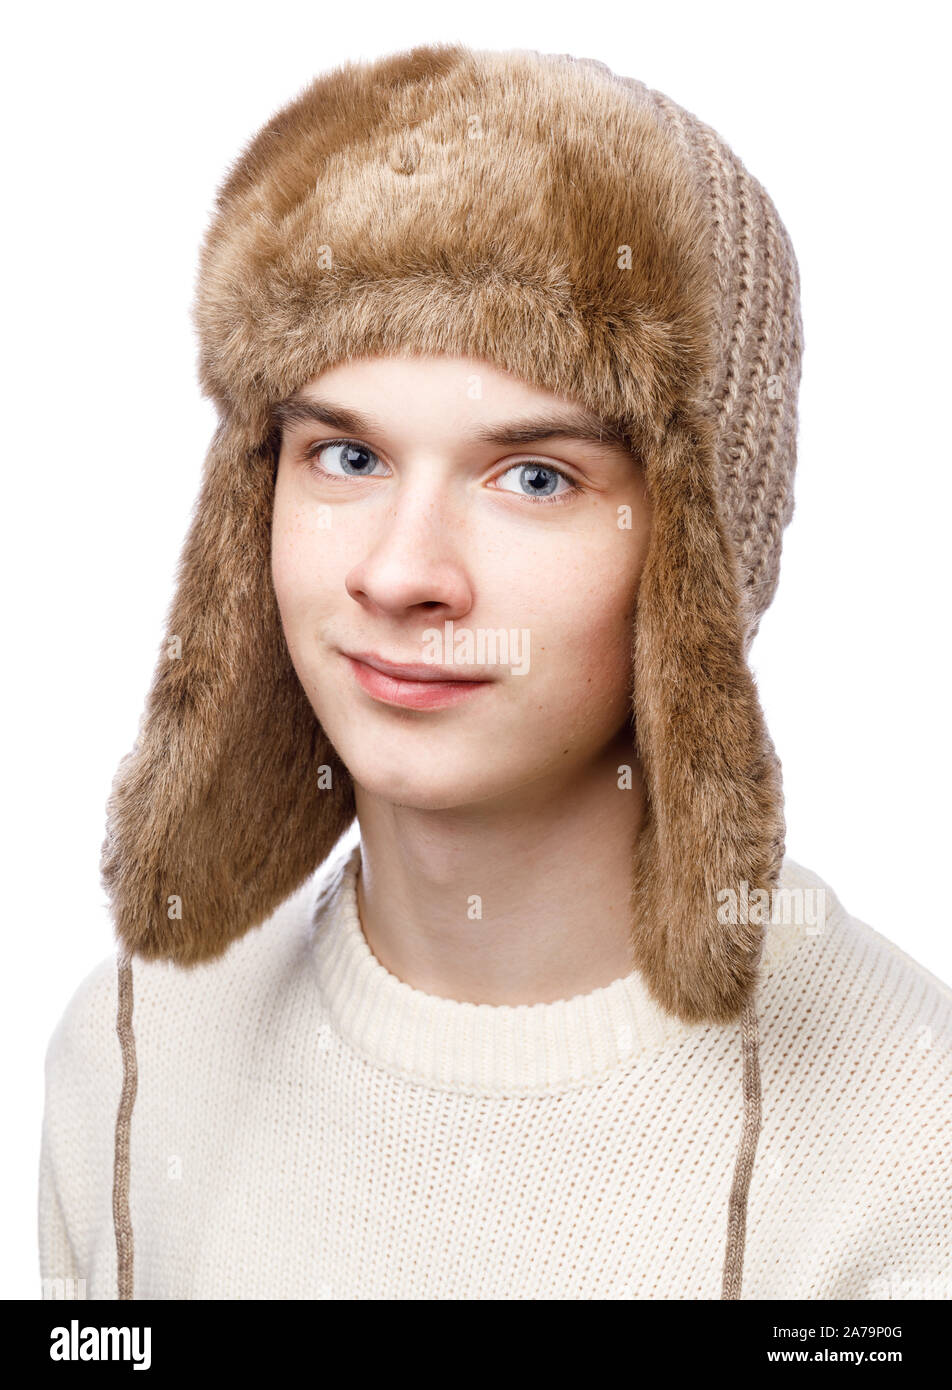 Head and shoulders studio portrait of smiling teenager boy wearing brown knitted faux fur winter trapper hat (Ushanka) and sweater on white background Stock Photo